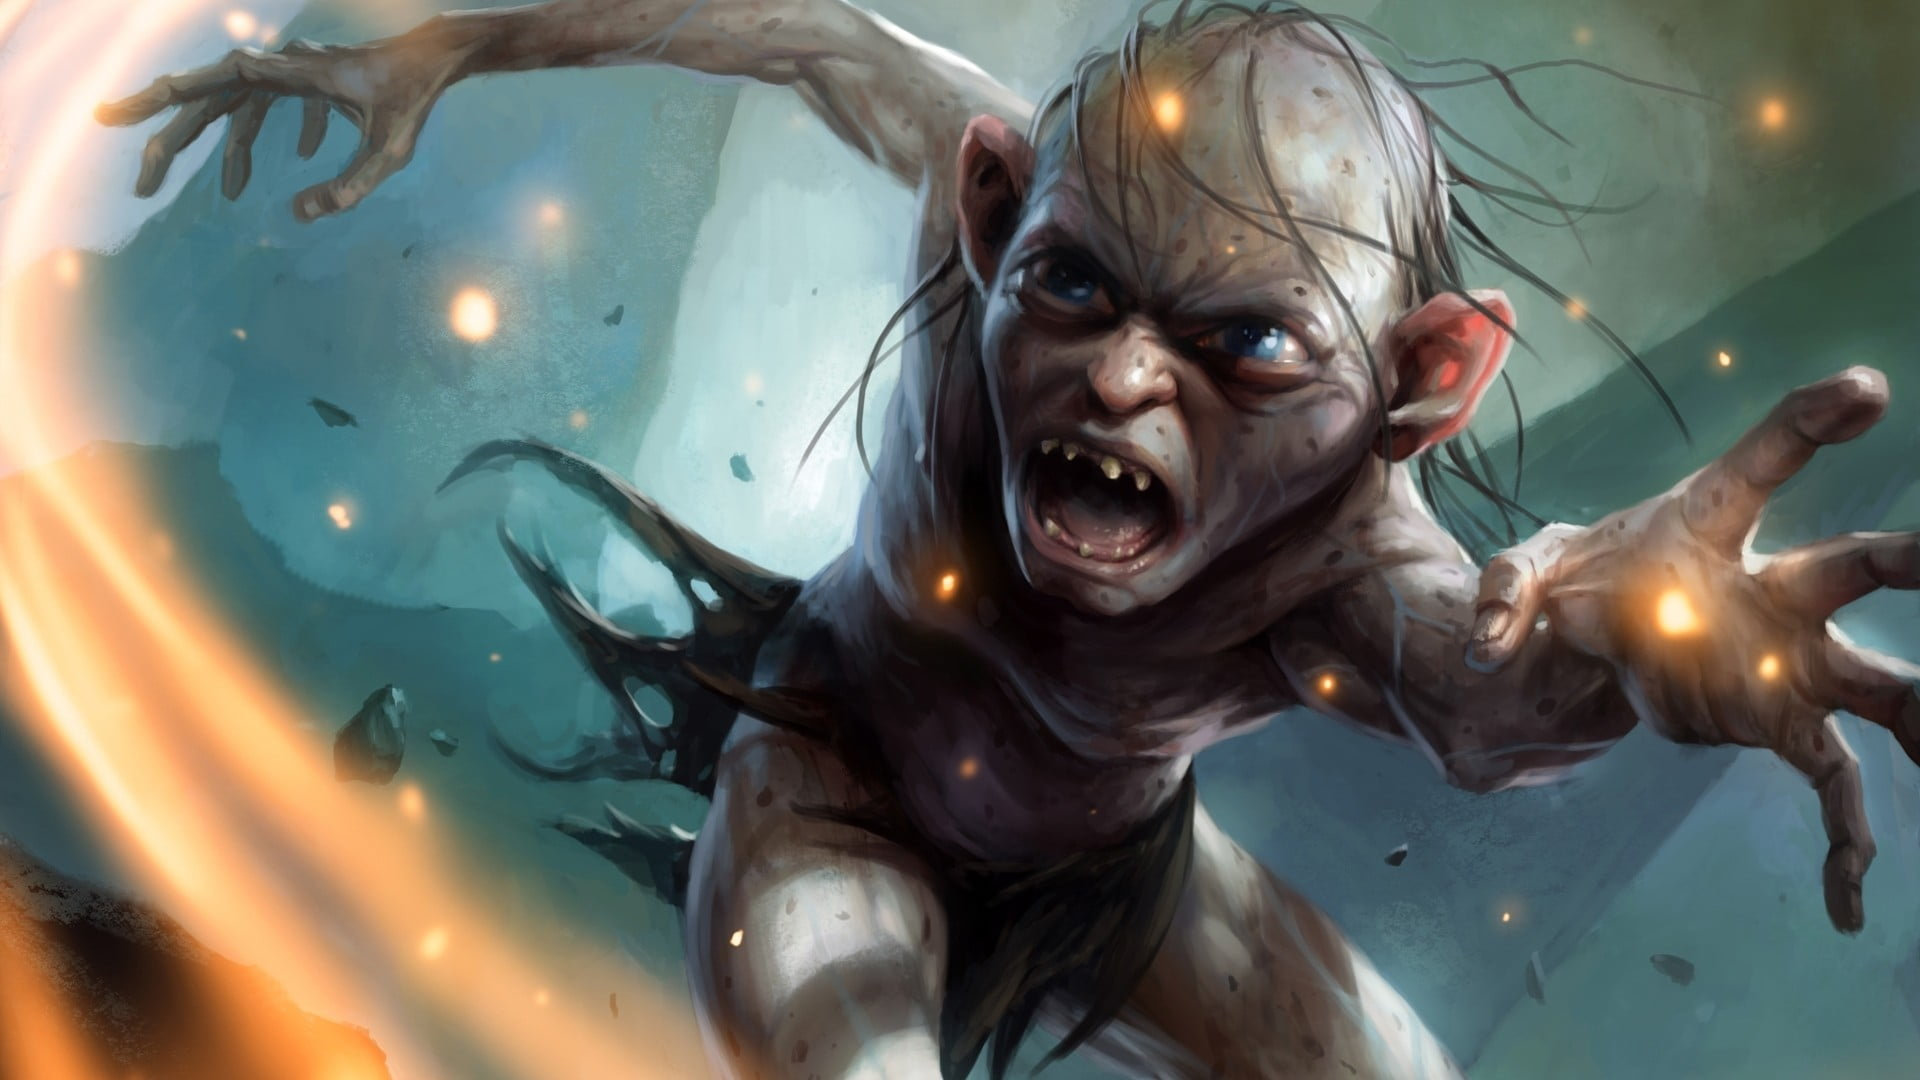 1920x1080 Smeagol digital wallpaper, Guardians of Middle-earth, Gollum, The Lord of the Rings HD wallpaper